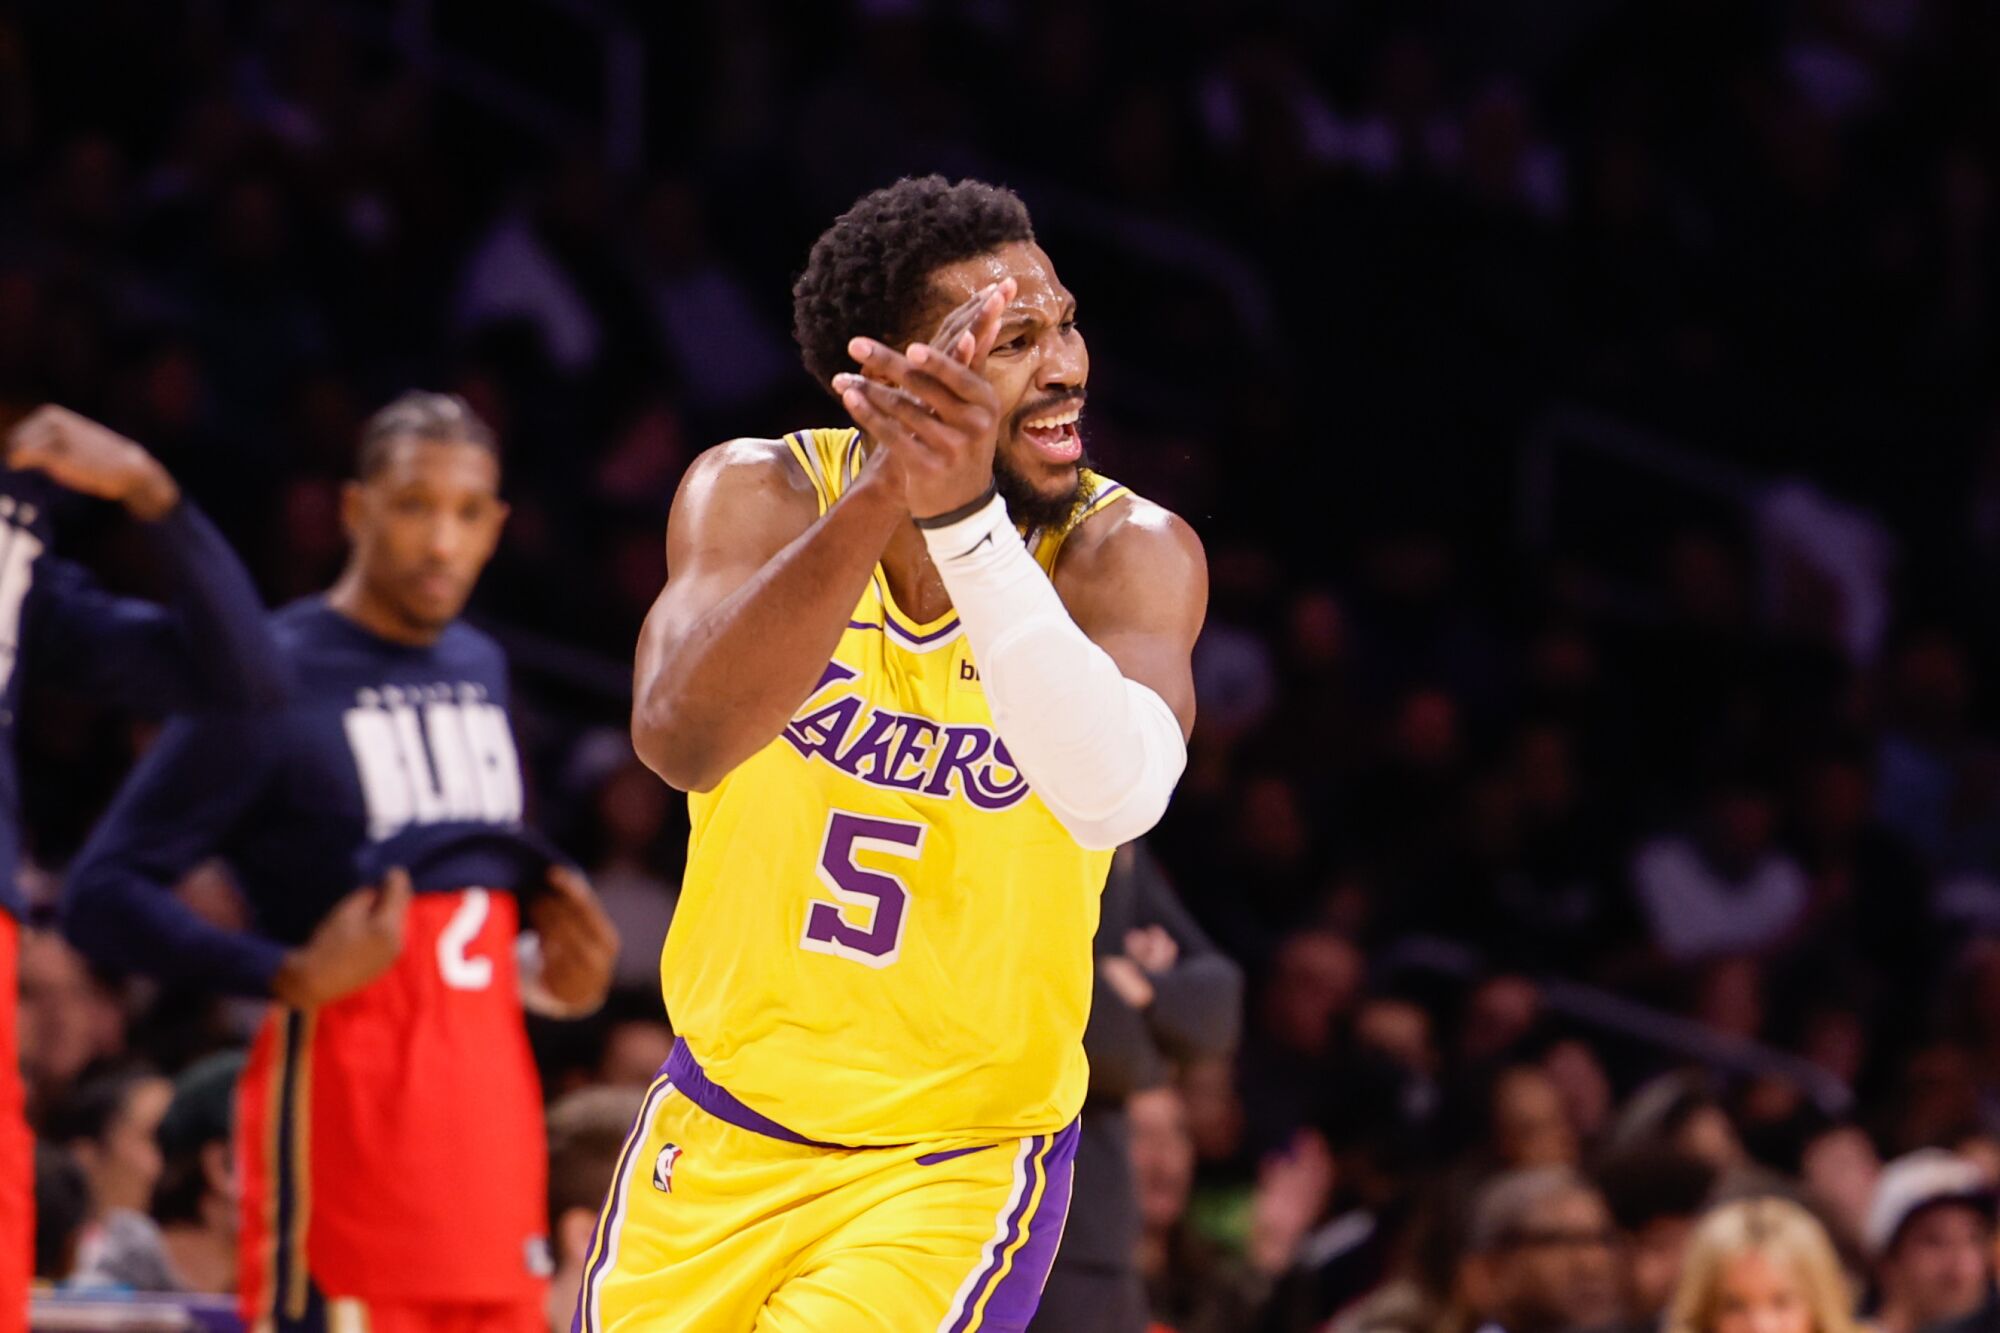 Lakers guard Malik Beasley claps his hands in celebration after scoring against the Pelicans.